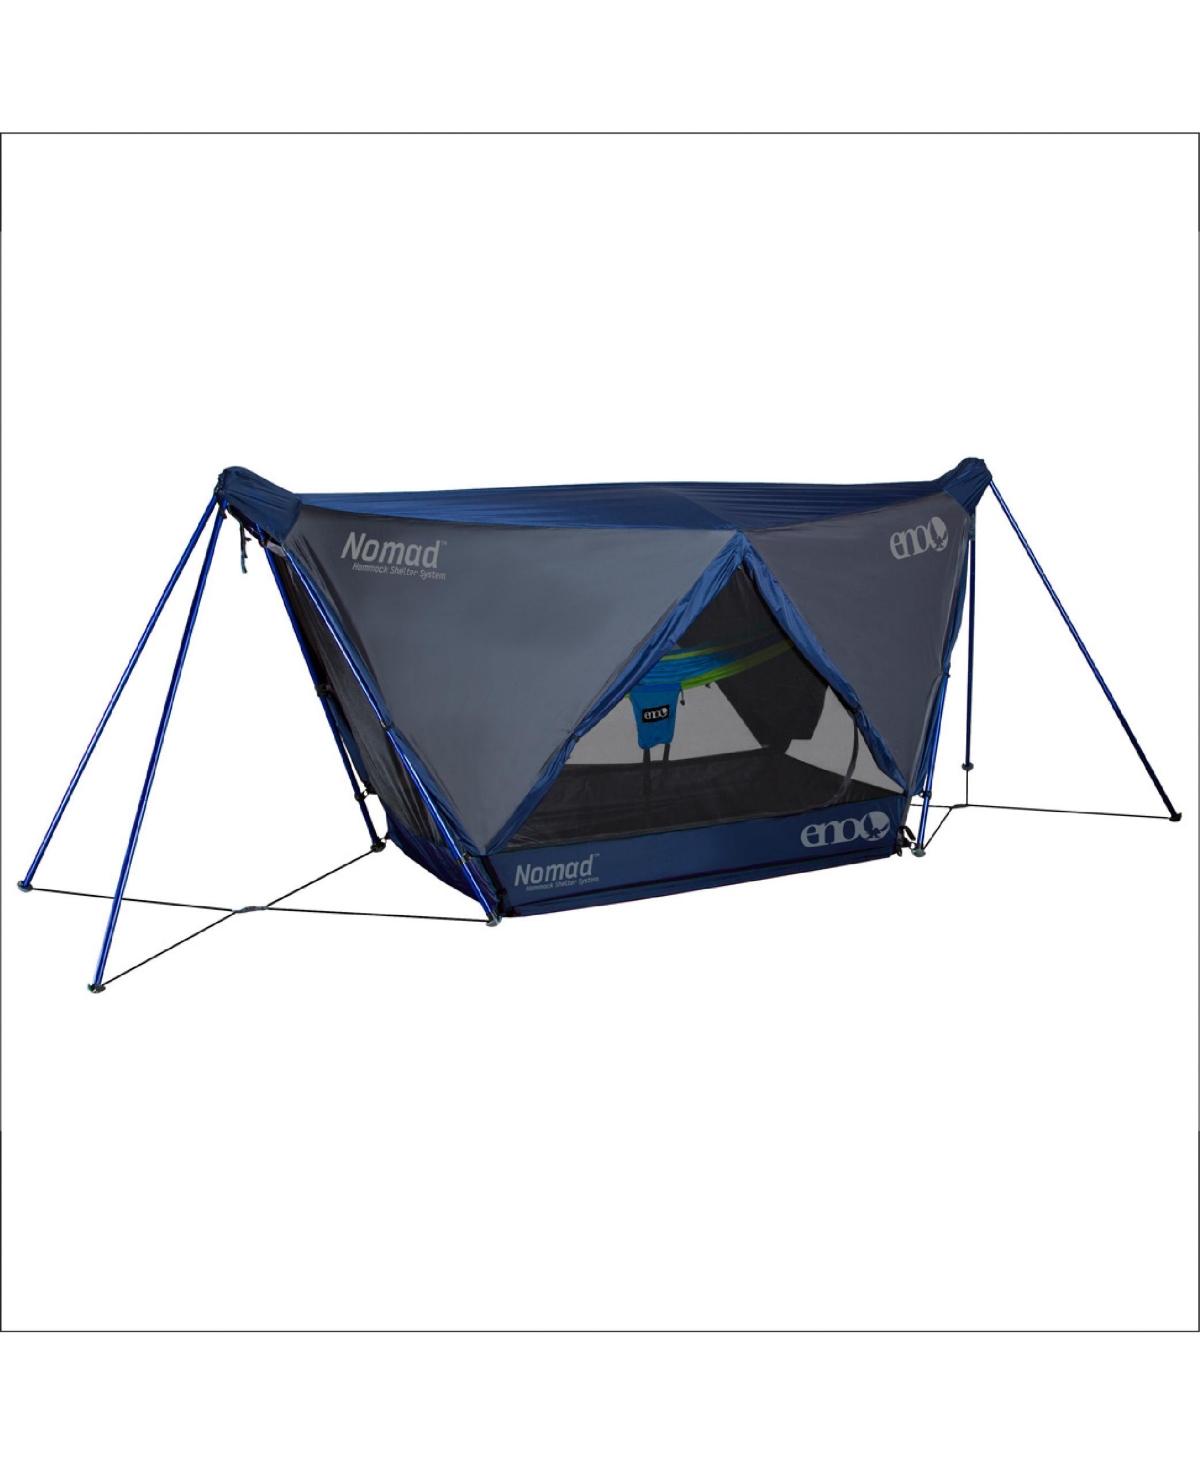 Nomad Shelter System - Hammock Camping Base Camp - Tent for Hammock Camping, Hiking, Backpacking, Festival, or the Beach - Navy - Navy